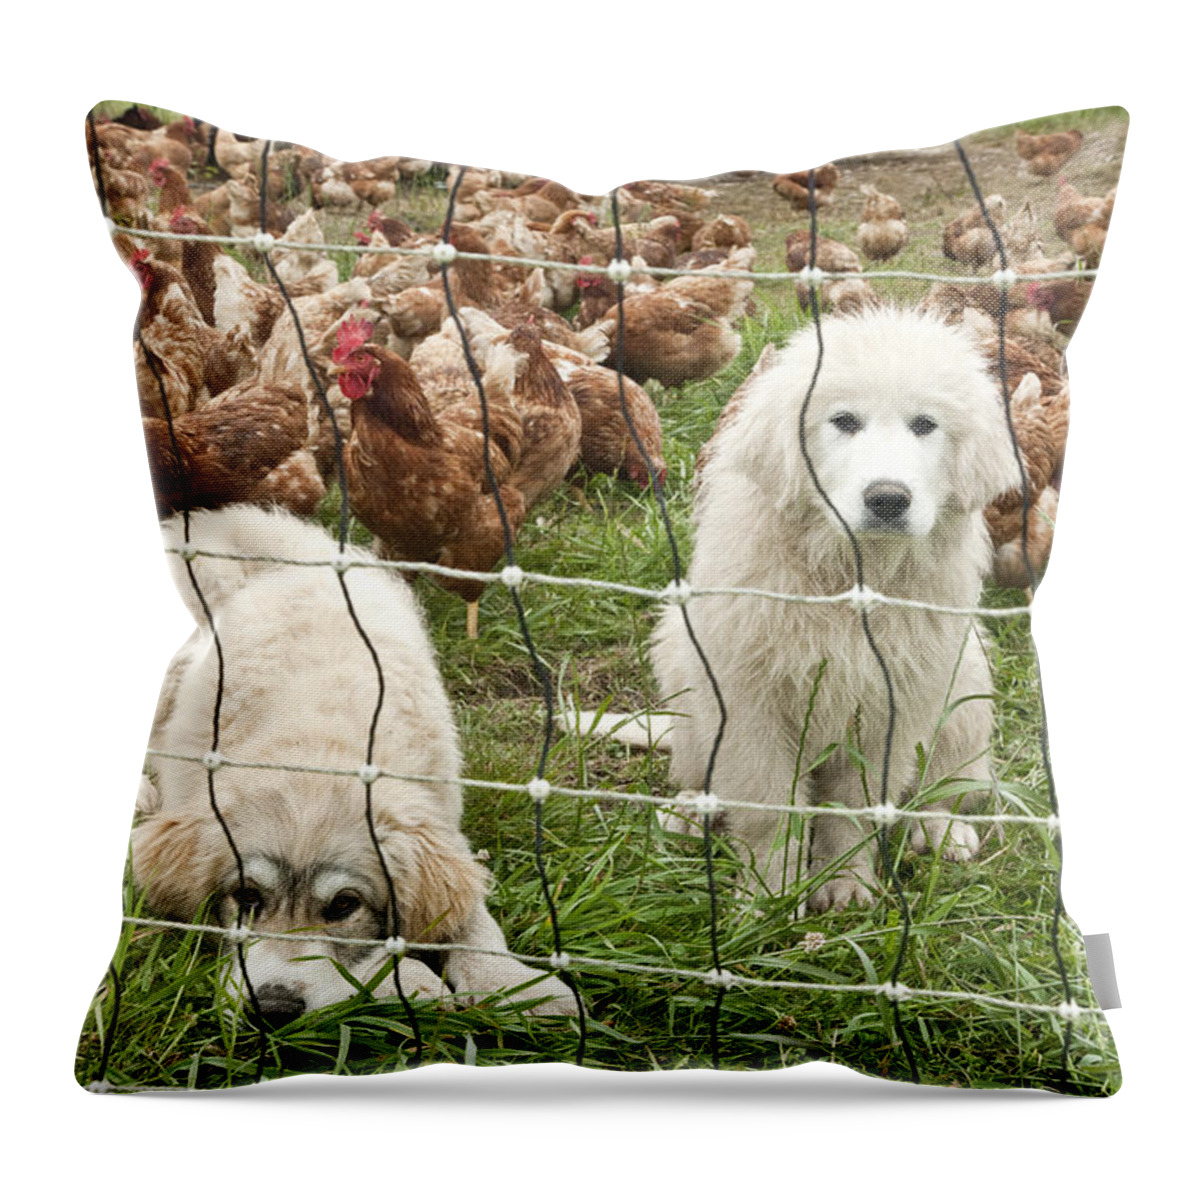 Free-range Chickens Throw Pillow featuring the photograph Great Pyrenees Pups Guard Chickens by Inga Spence